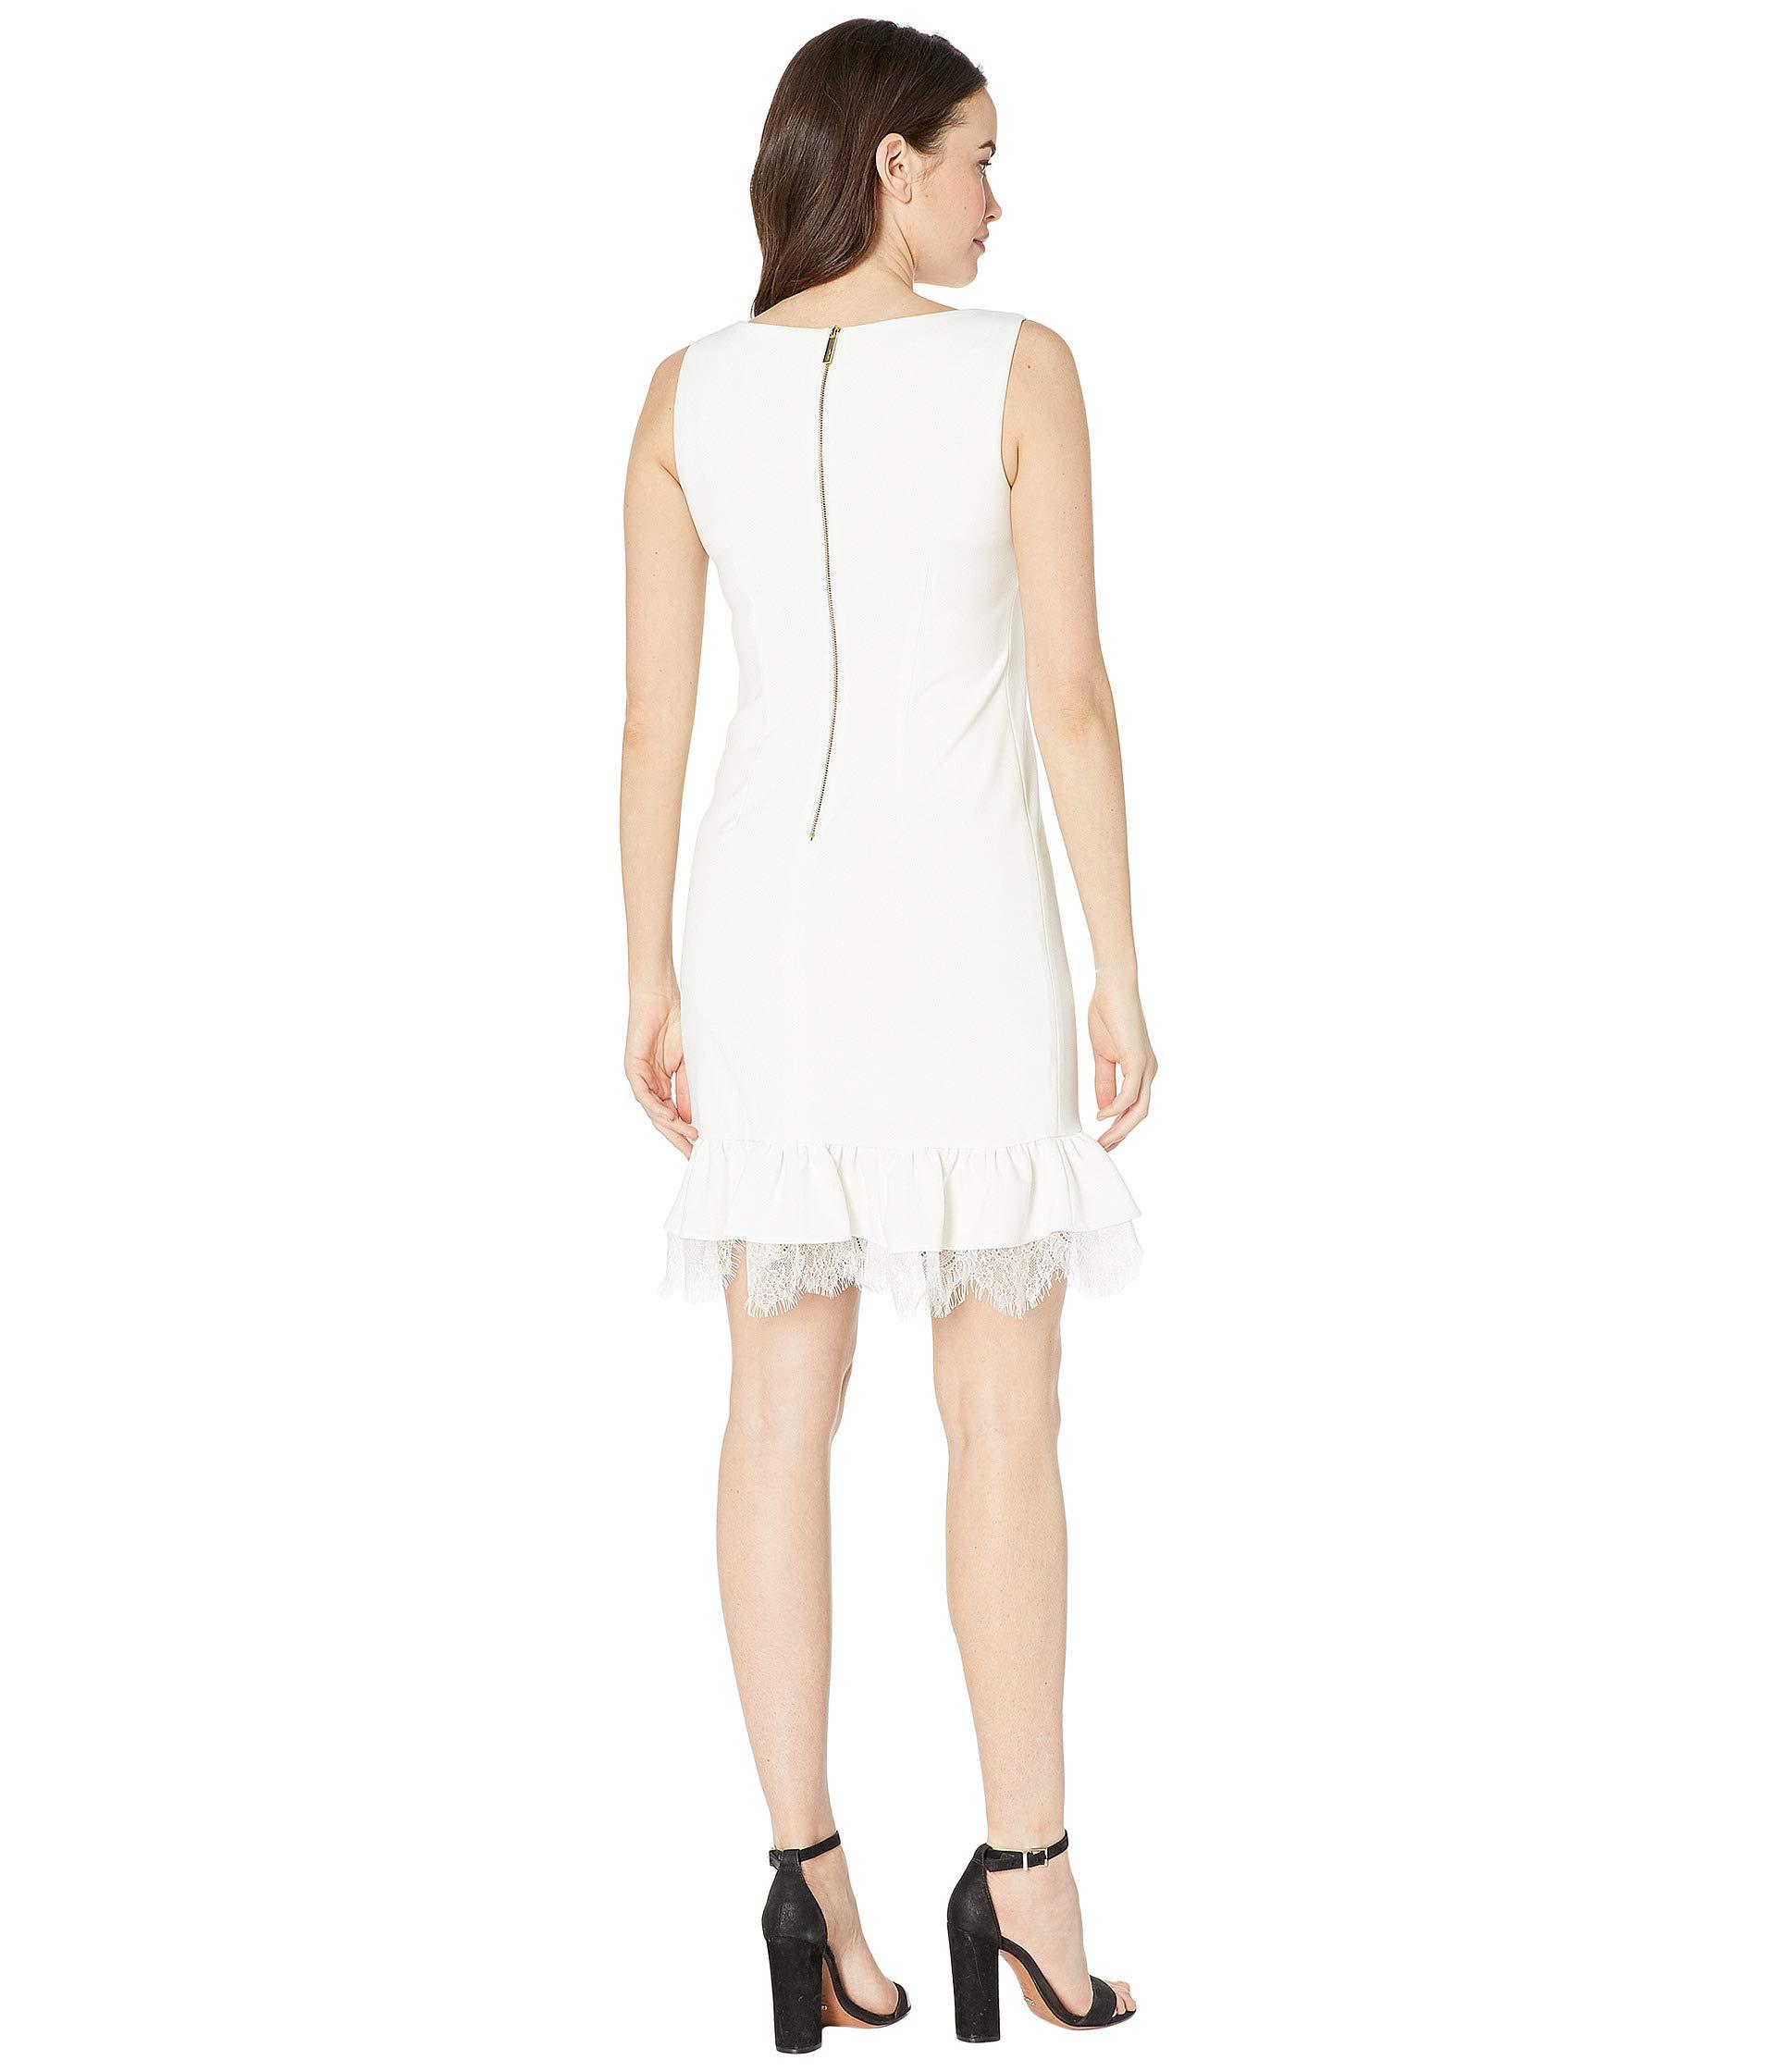 Calvin Klein Ruffle Hem Dress With Lace Detail in White - Lyst